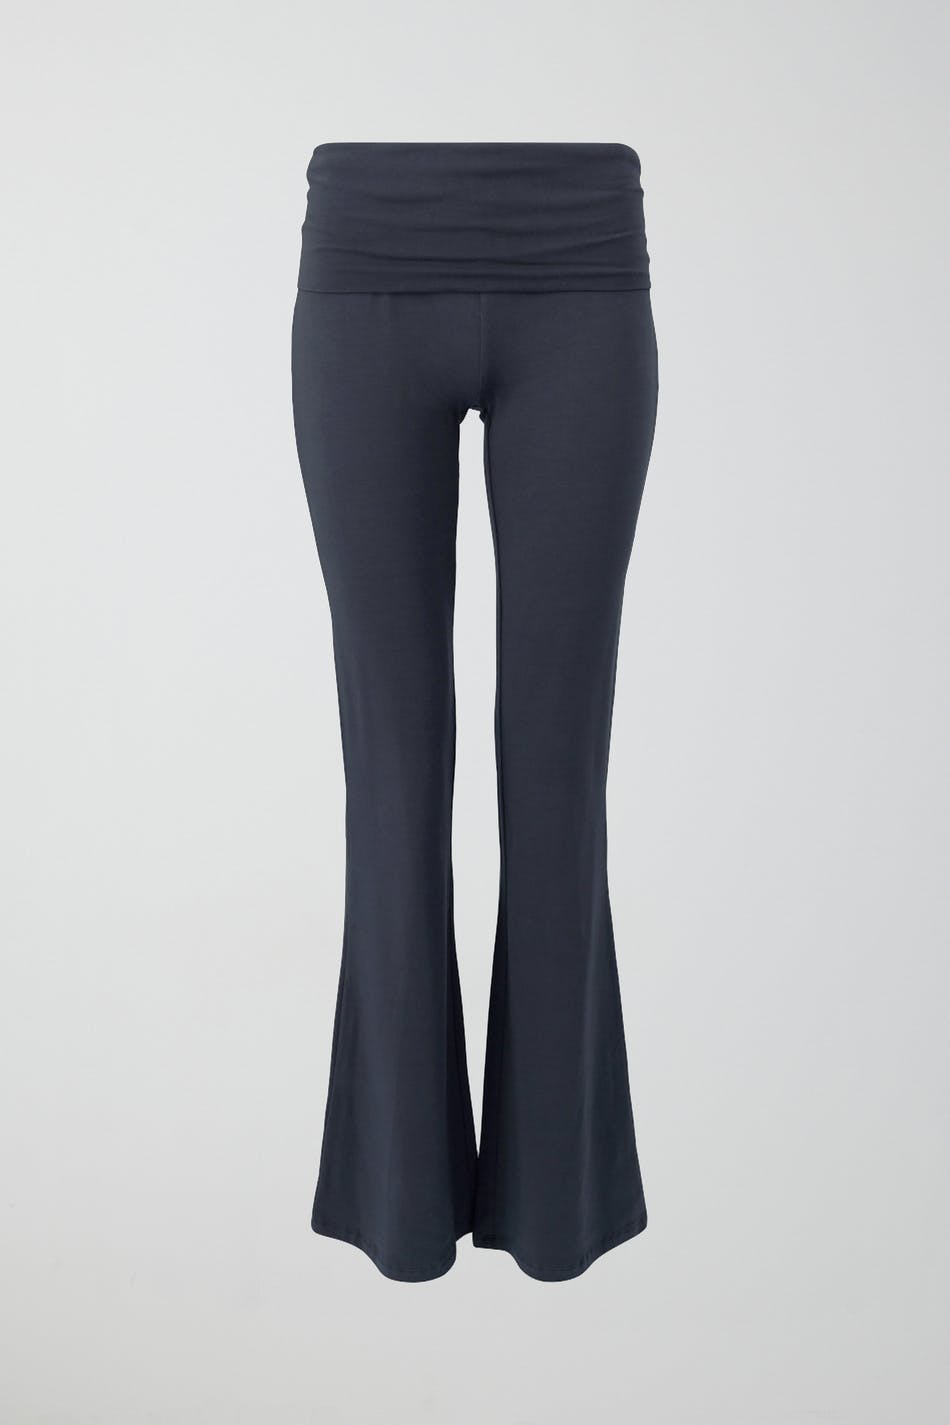 Gina Tricot - Soft touch tall trousers - yoga-pants - Grey - XXS - Female